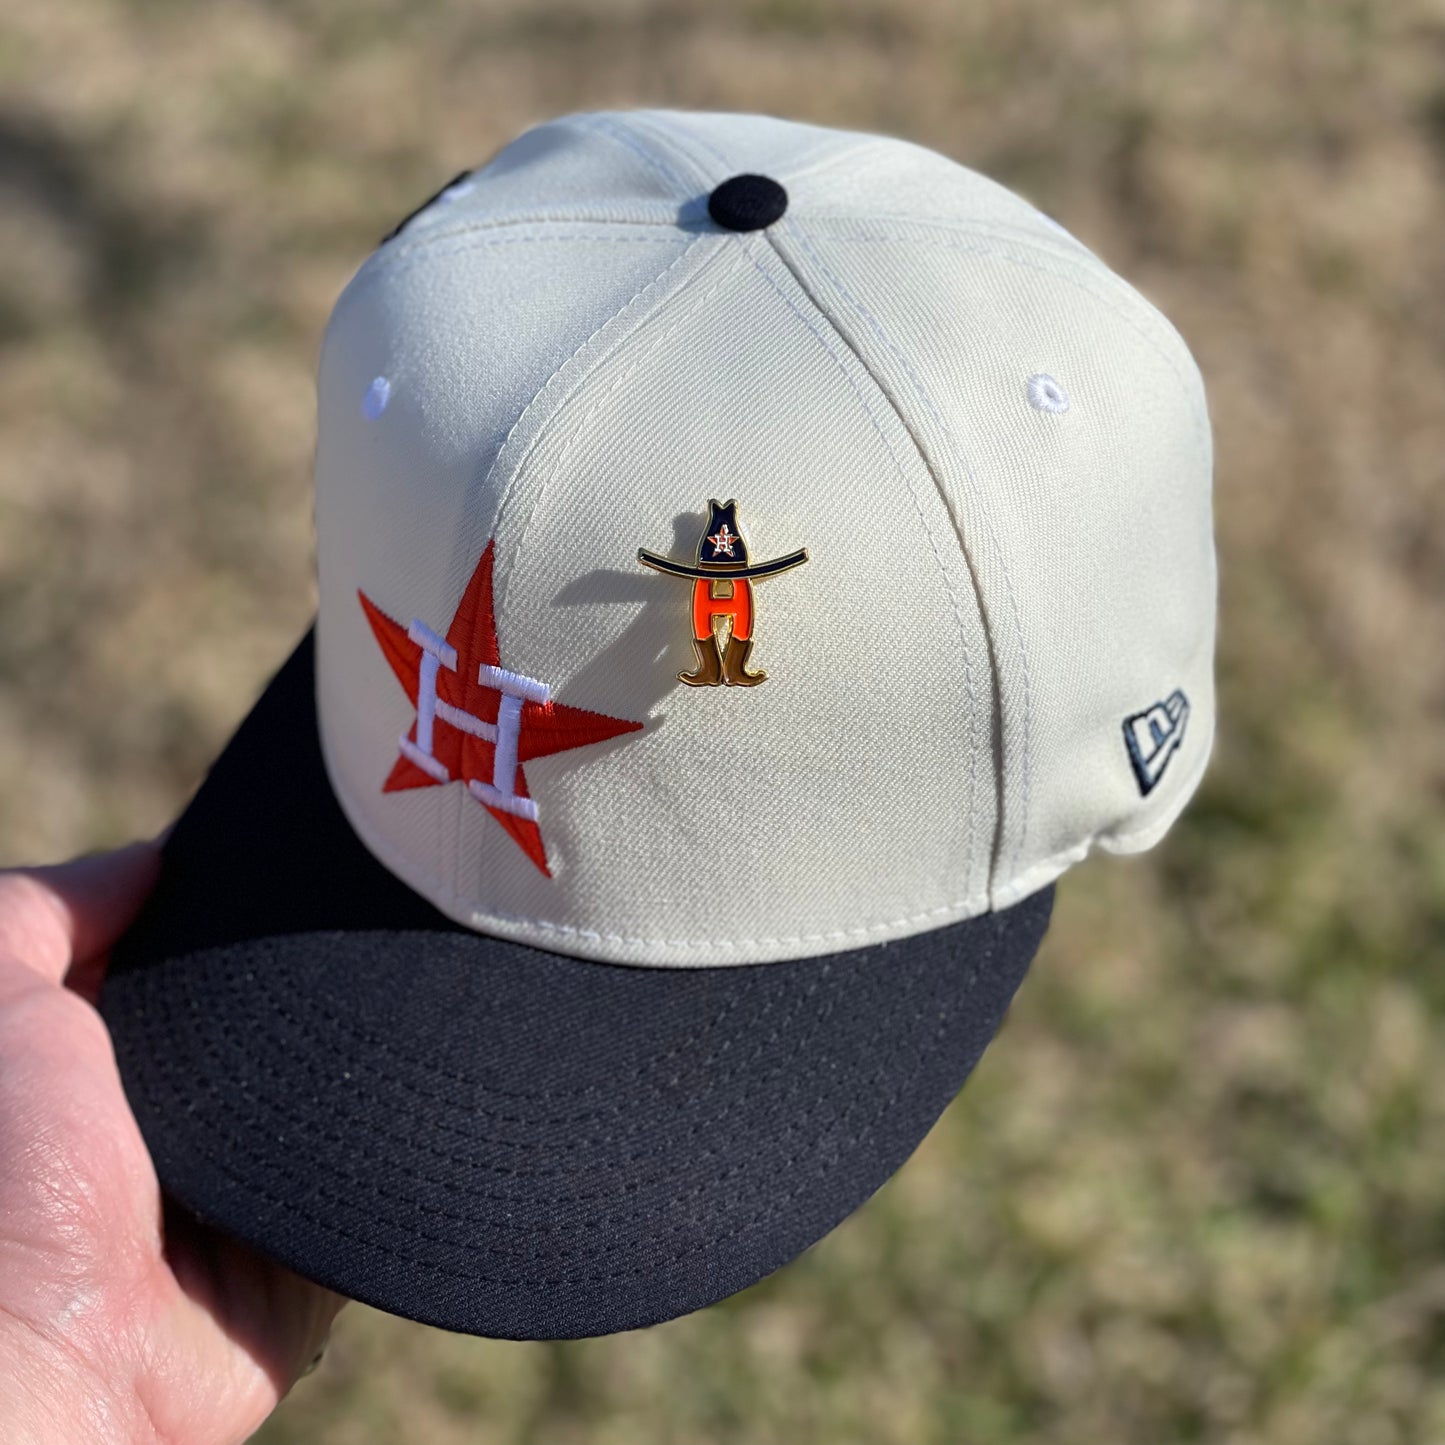 This Ain’t My First Rodeo Pin - Houston Astros